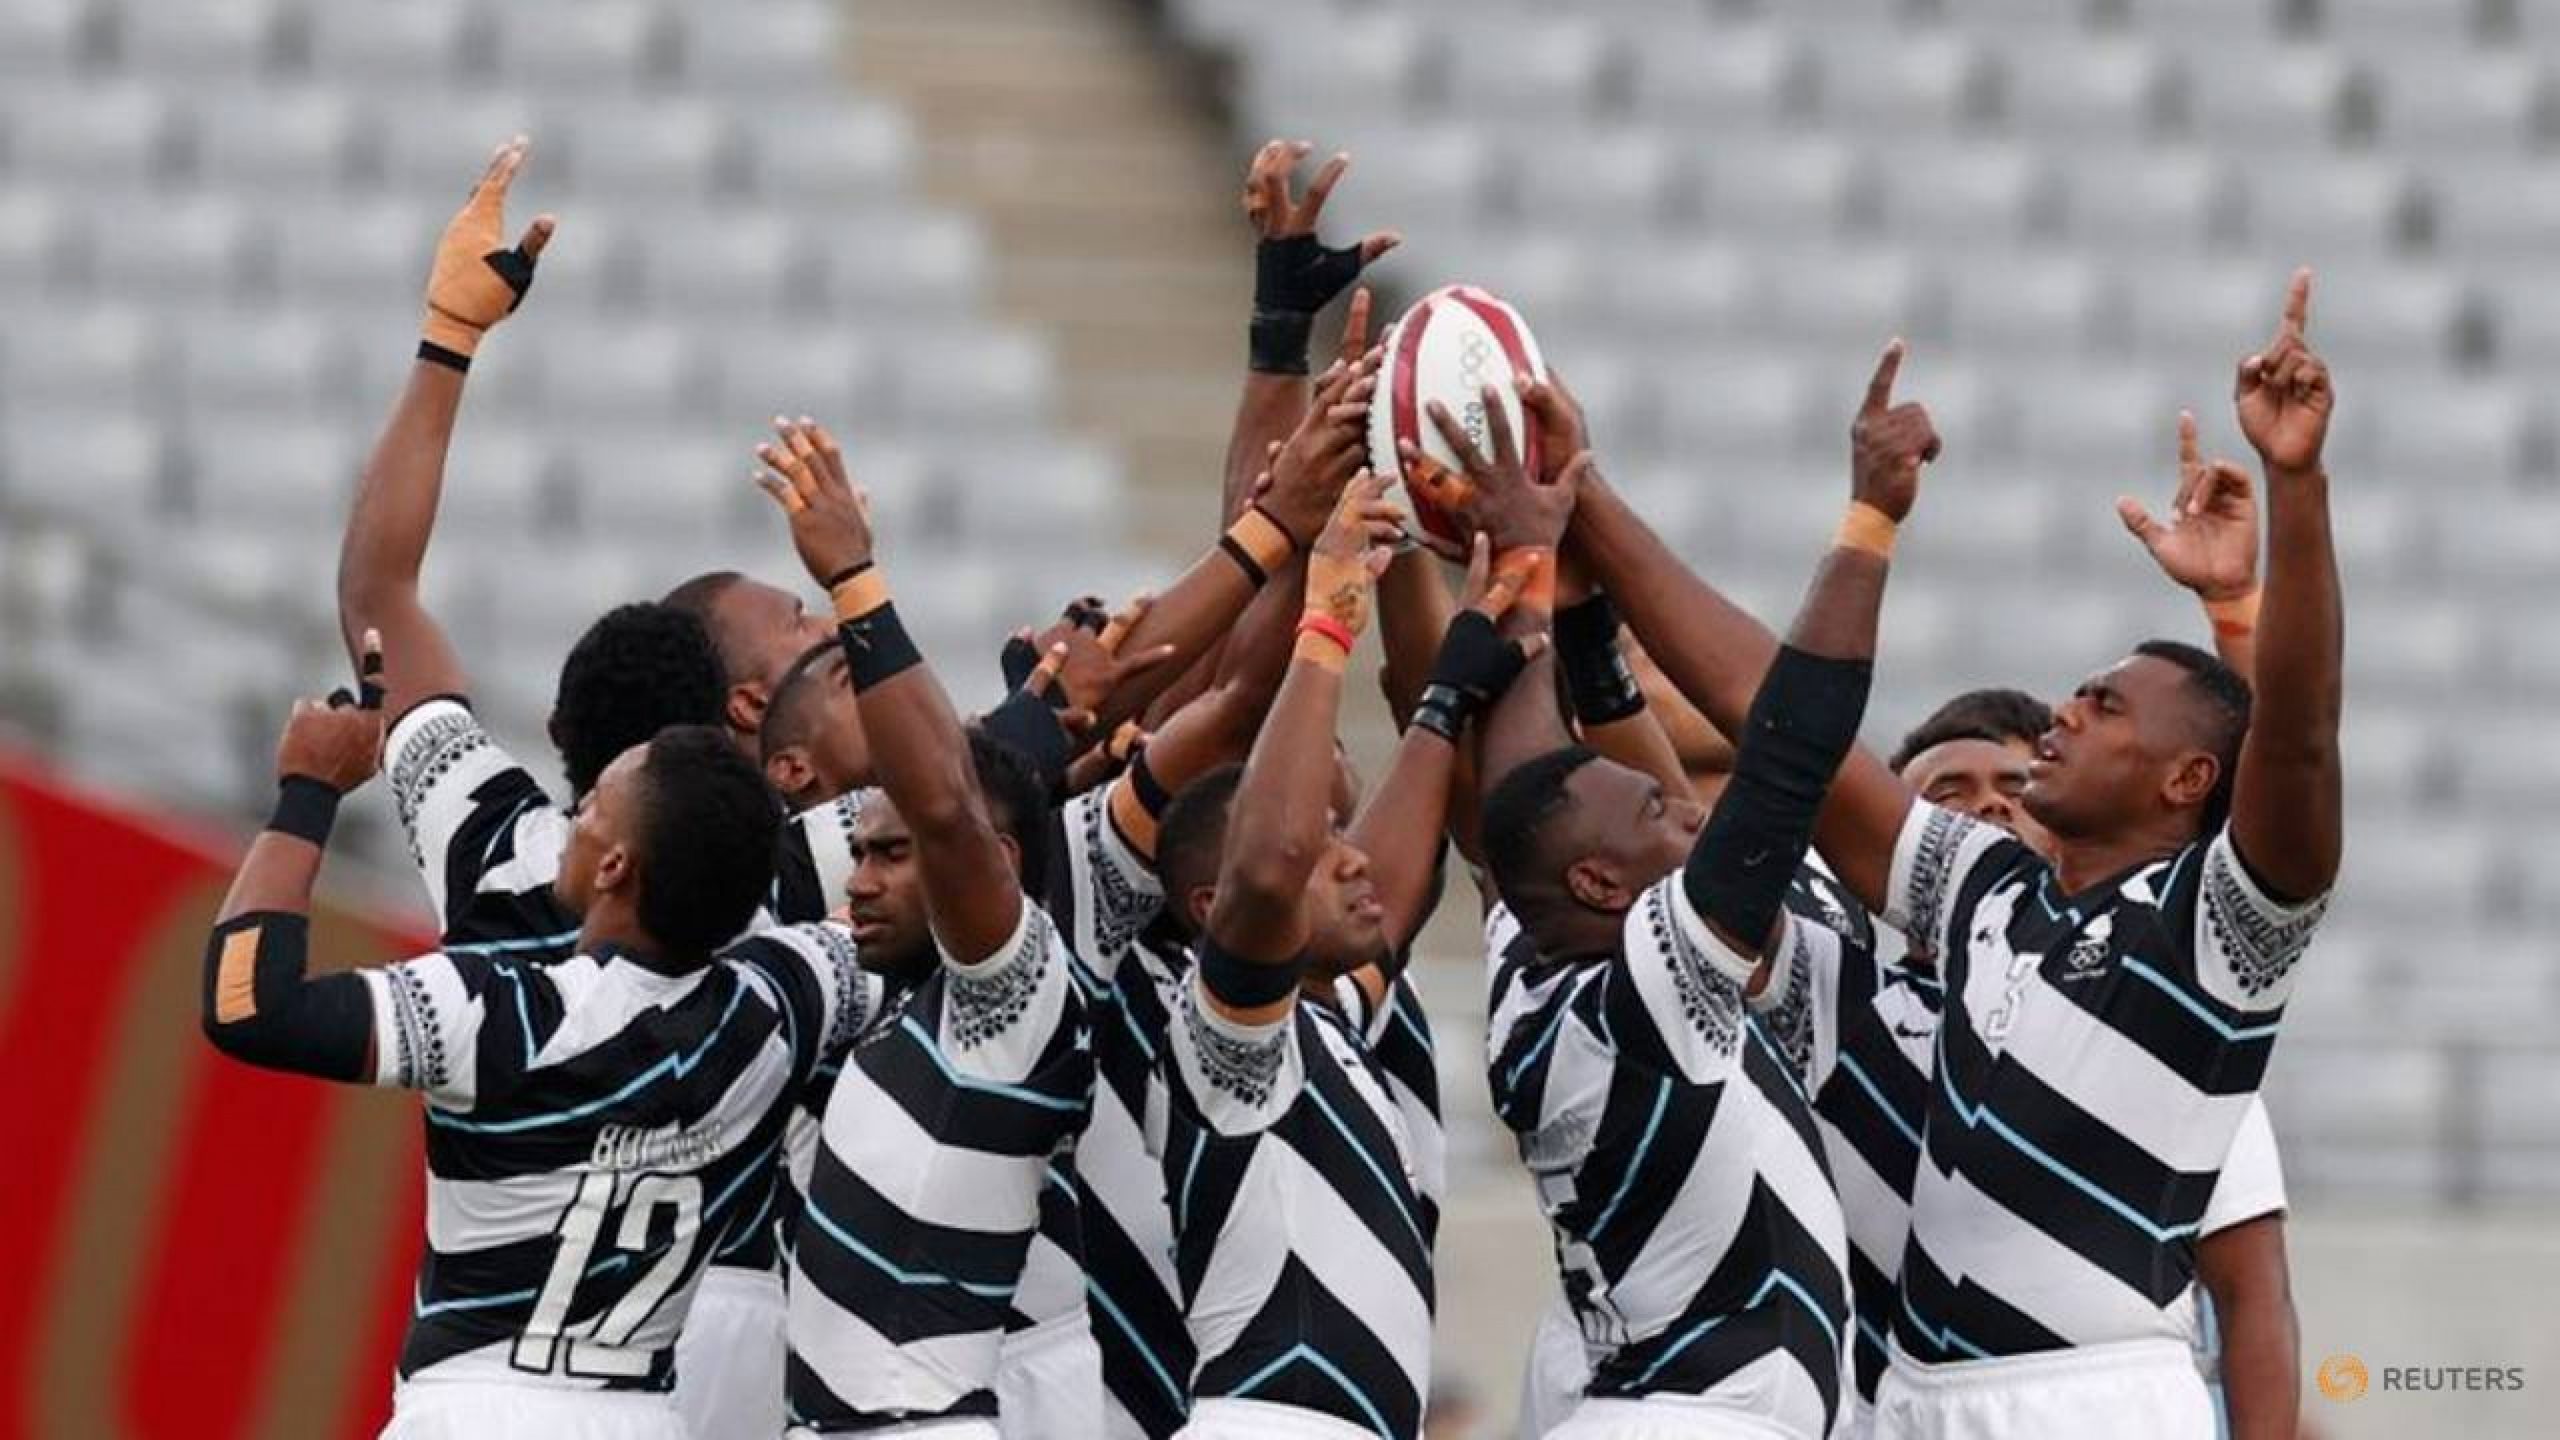 Fiji retain Olympic rugby sevens title with final win over New Zealand